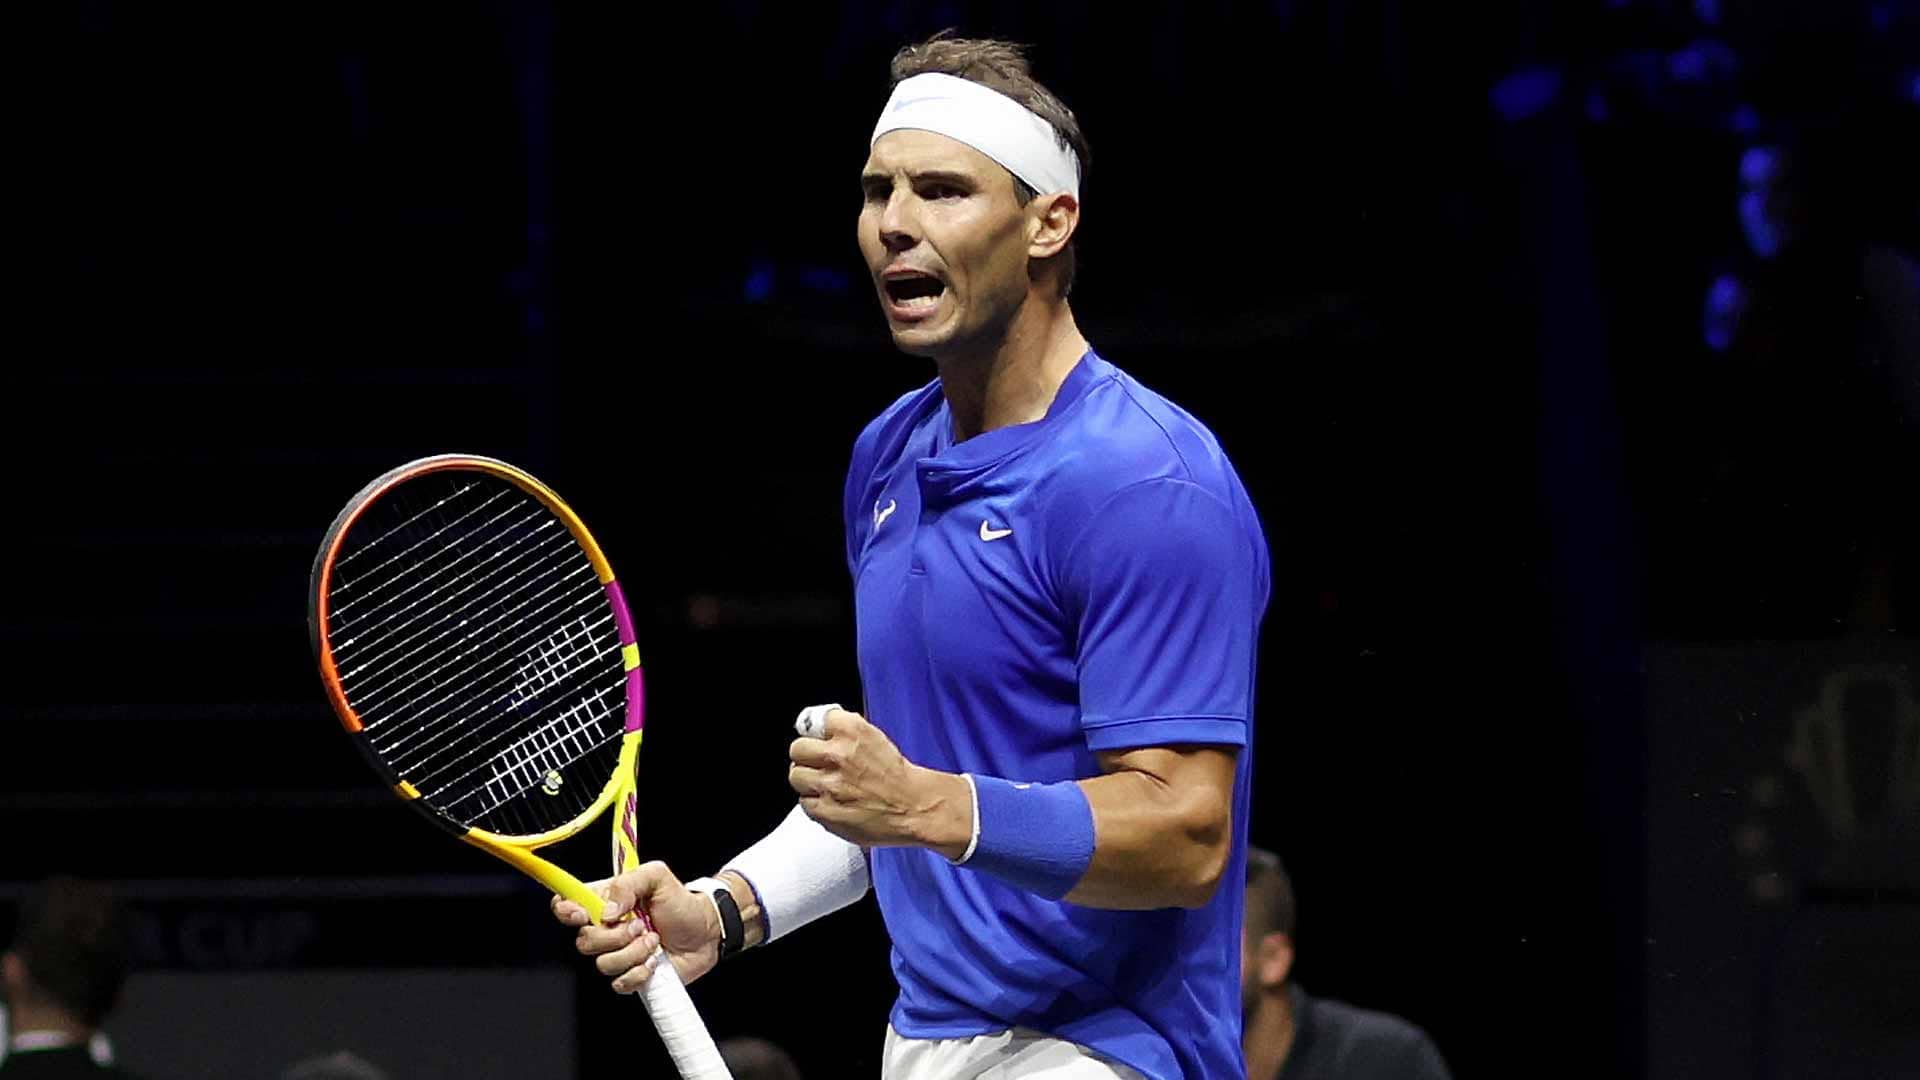 Rafael Nadal last competed at the Laver Cup, where he partnered Roger Federer in the final match of the Swiss' career.